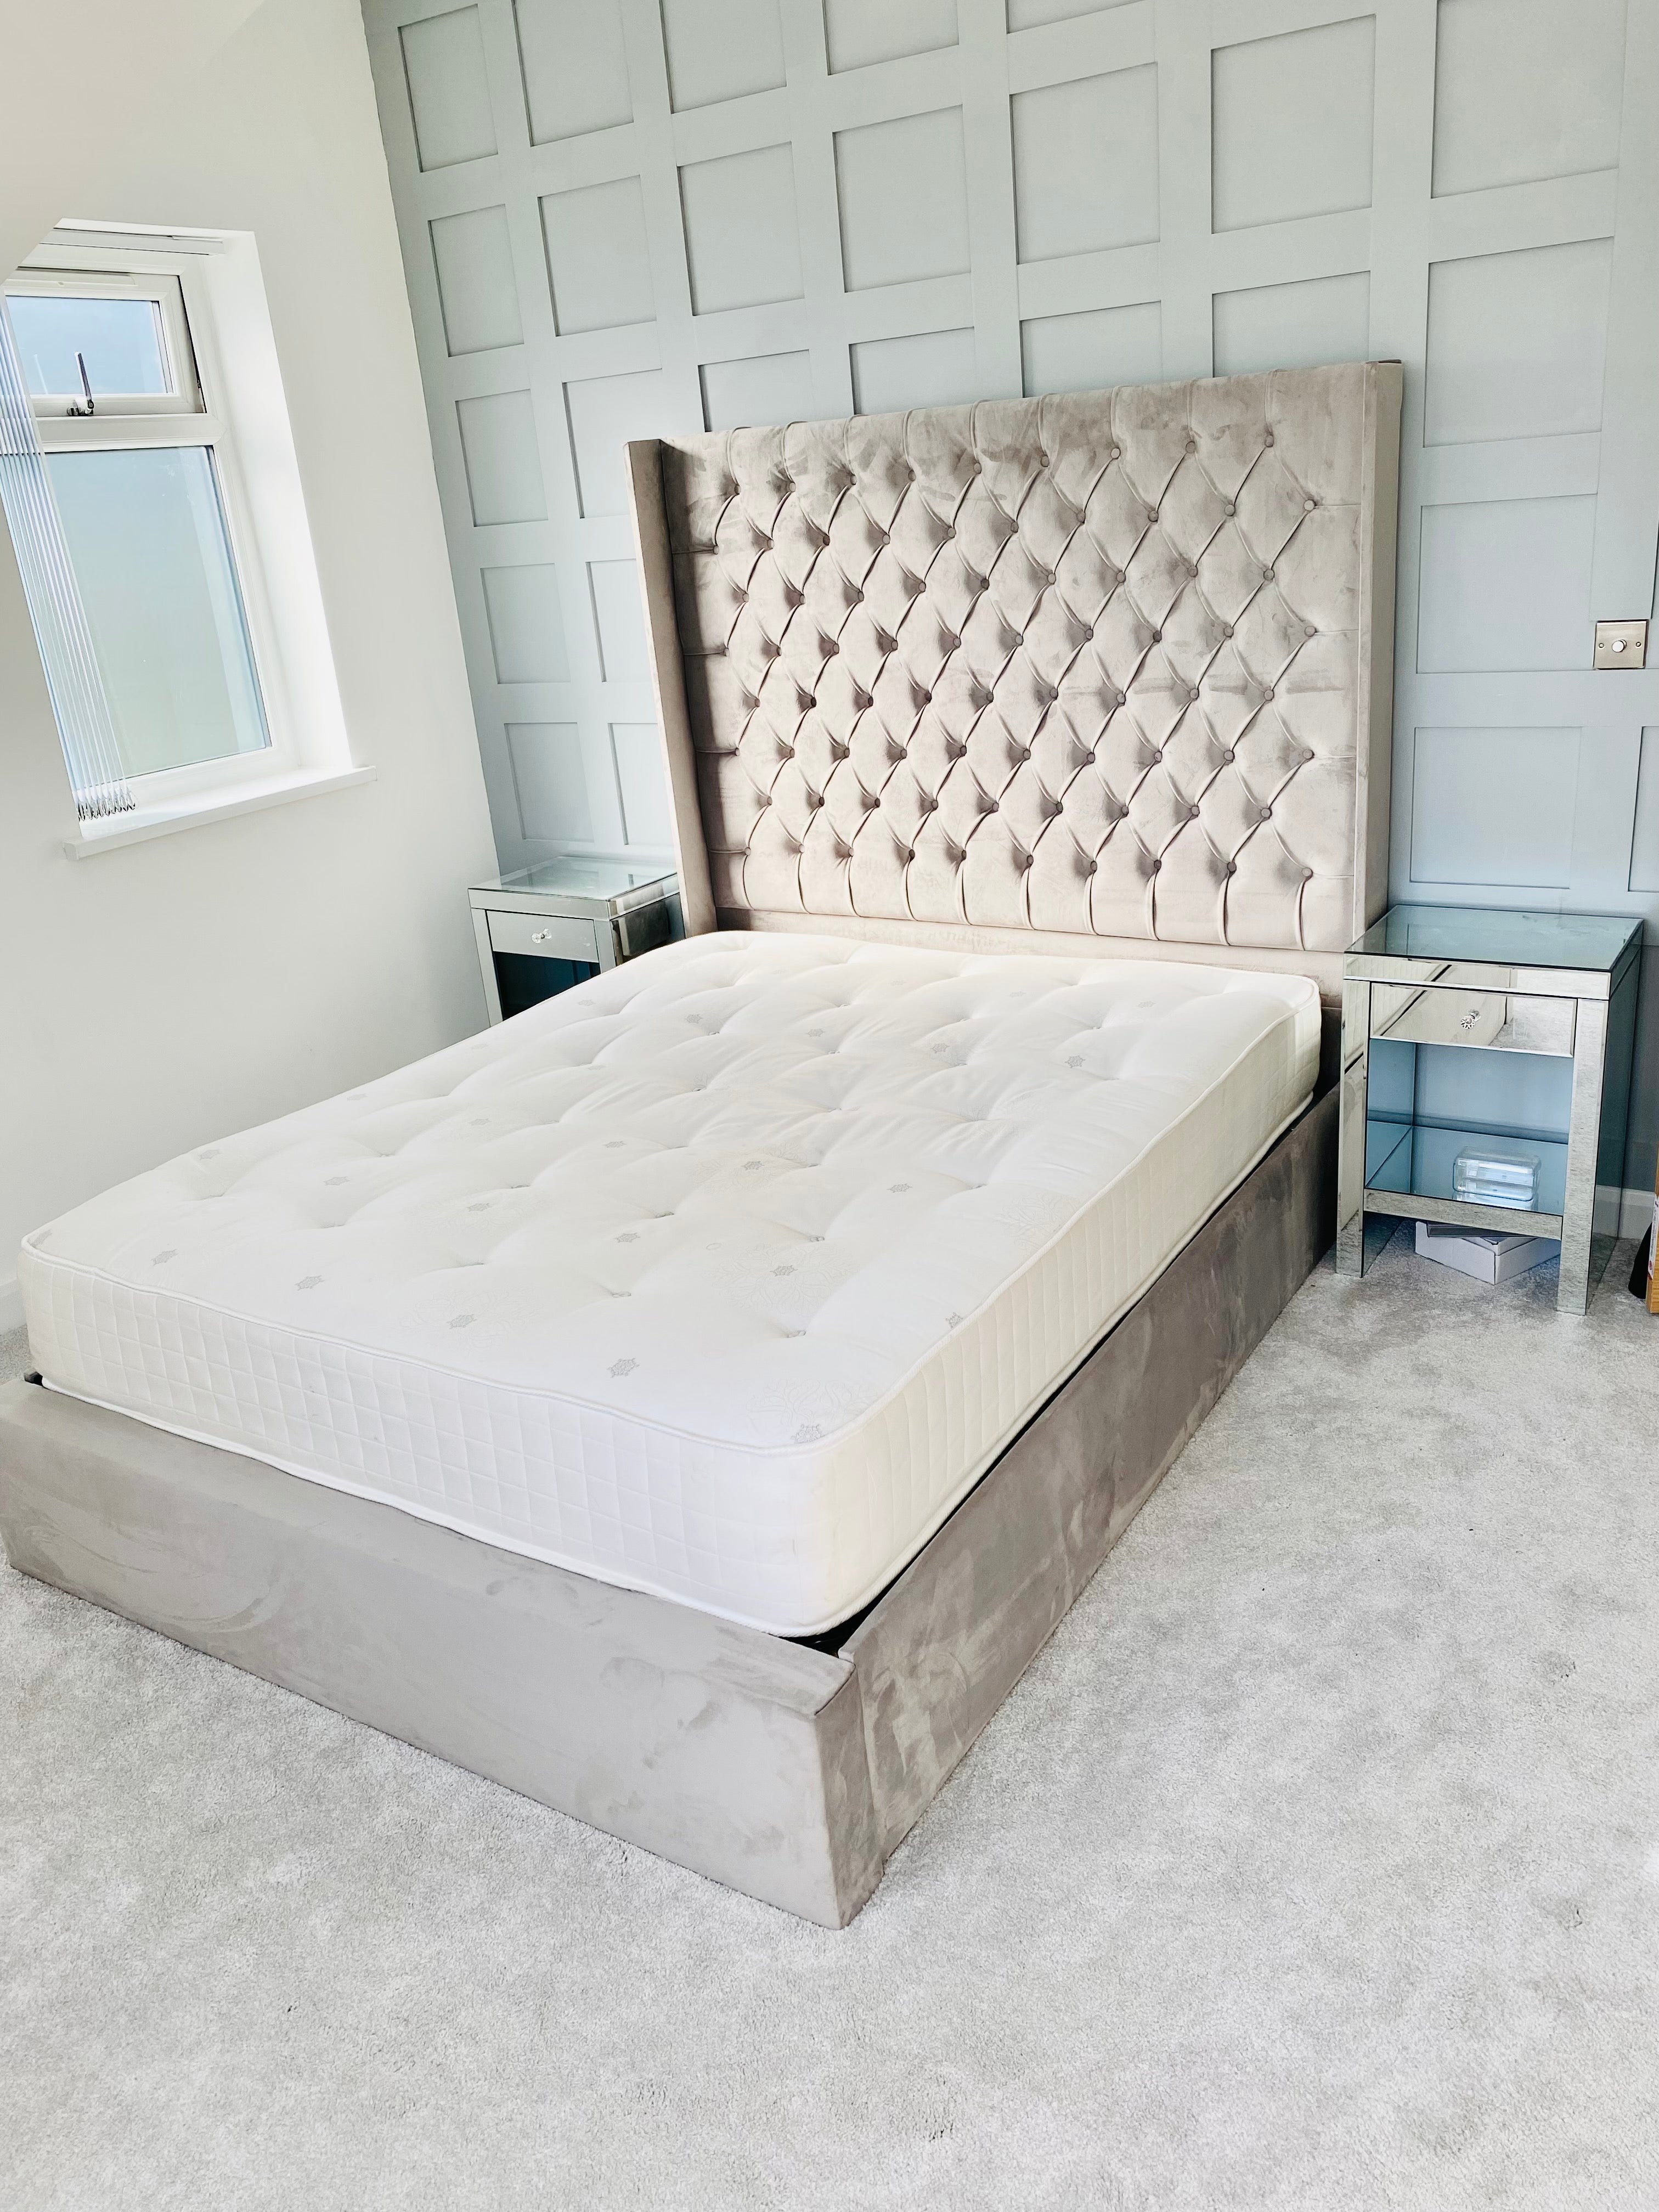 The Bespoke Chesterfield Wing Bed-Fully Customisable with Storage Options- Chesterfield Range